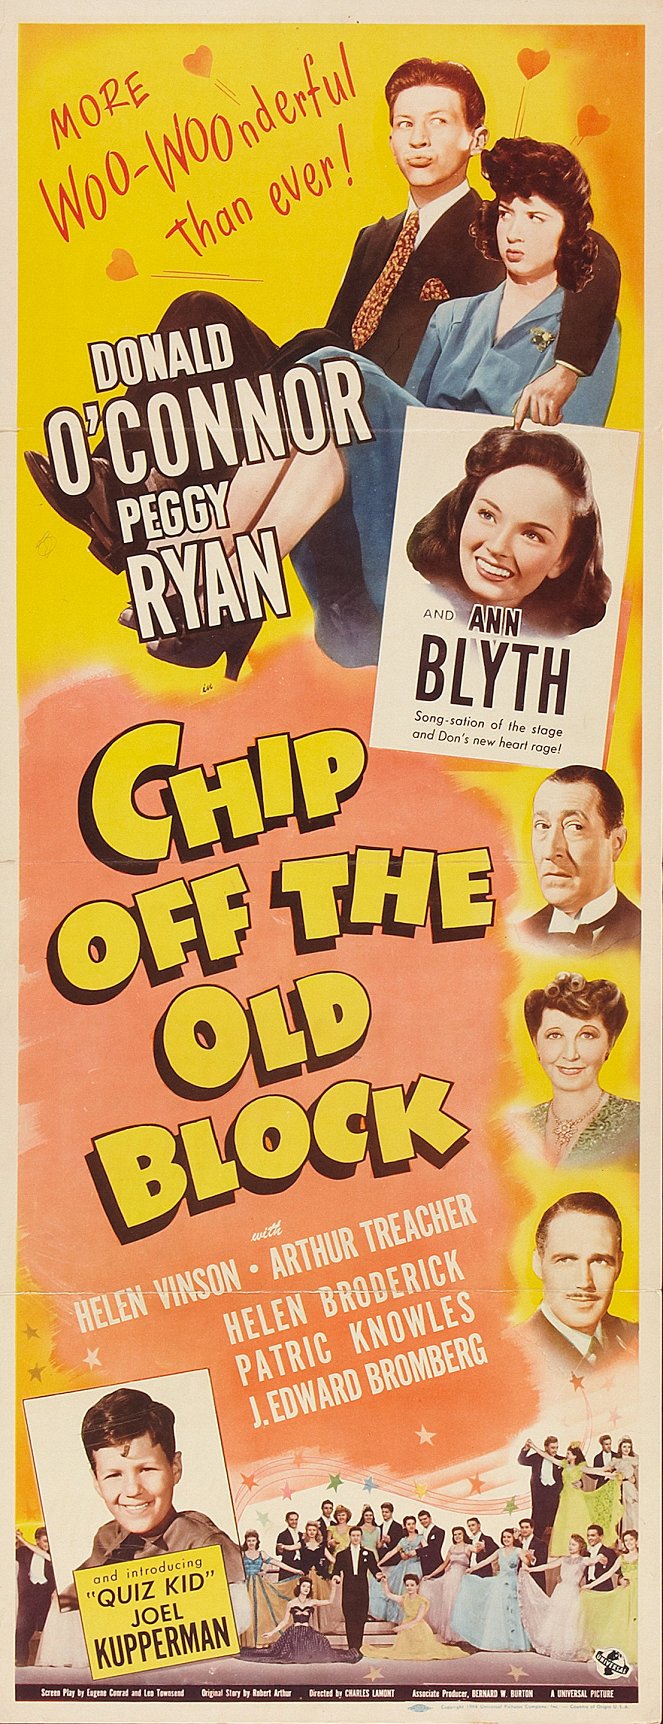 Chip Off the Old Block - Posters